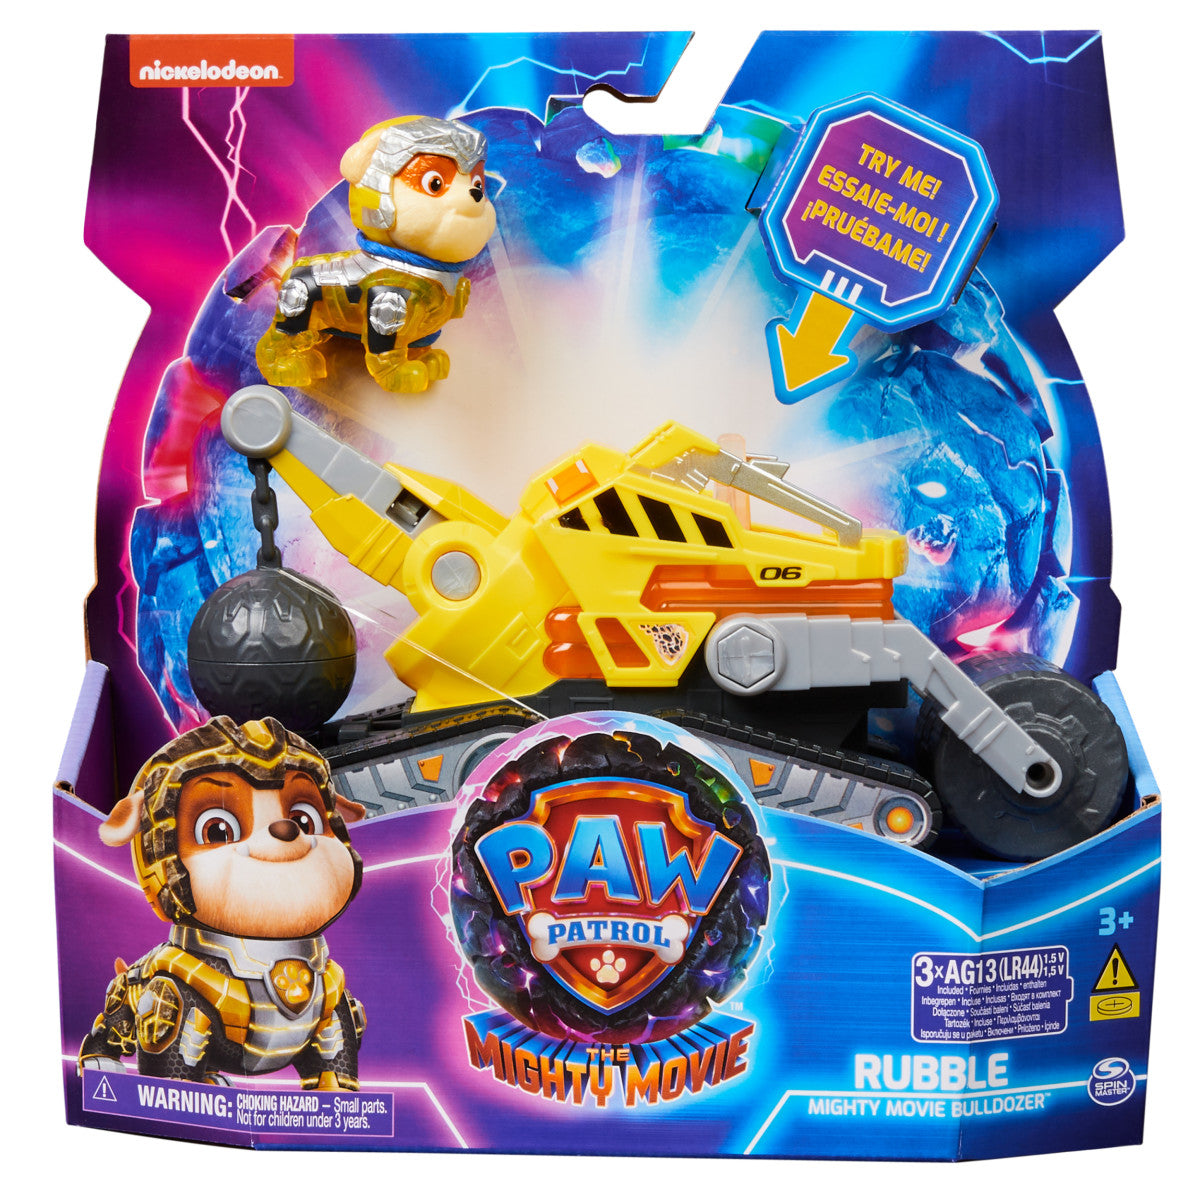 Paw Patrol: The Mighty Movie - Rubble Vehiculo Tematico